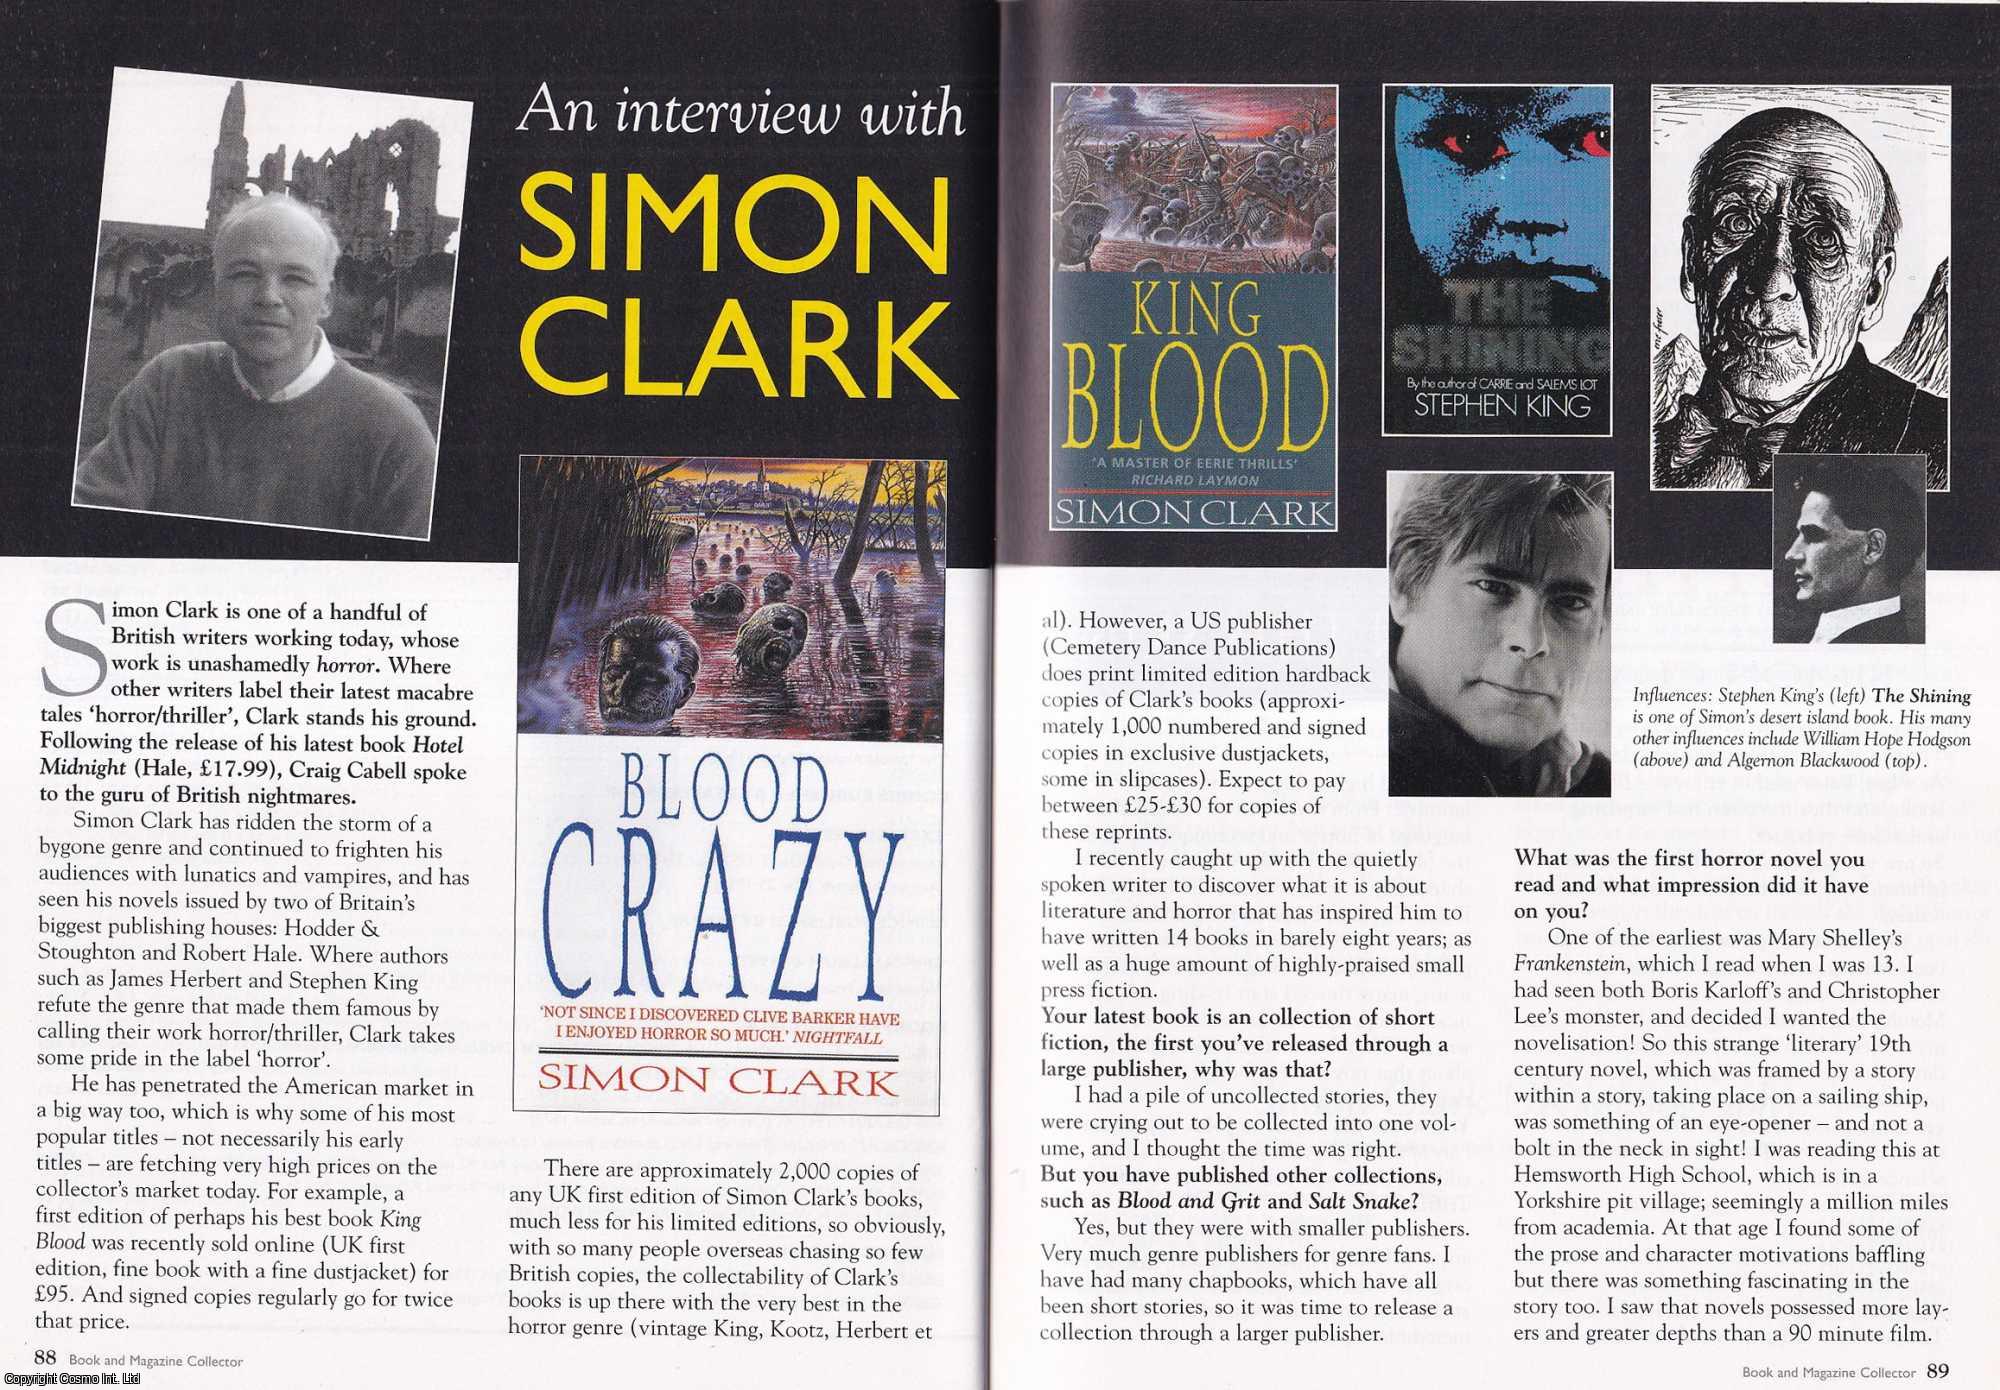 --- - An Interview with Simon Clark. This is an original article separated from an issue of The Book & Magazine Collector publication.